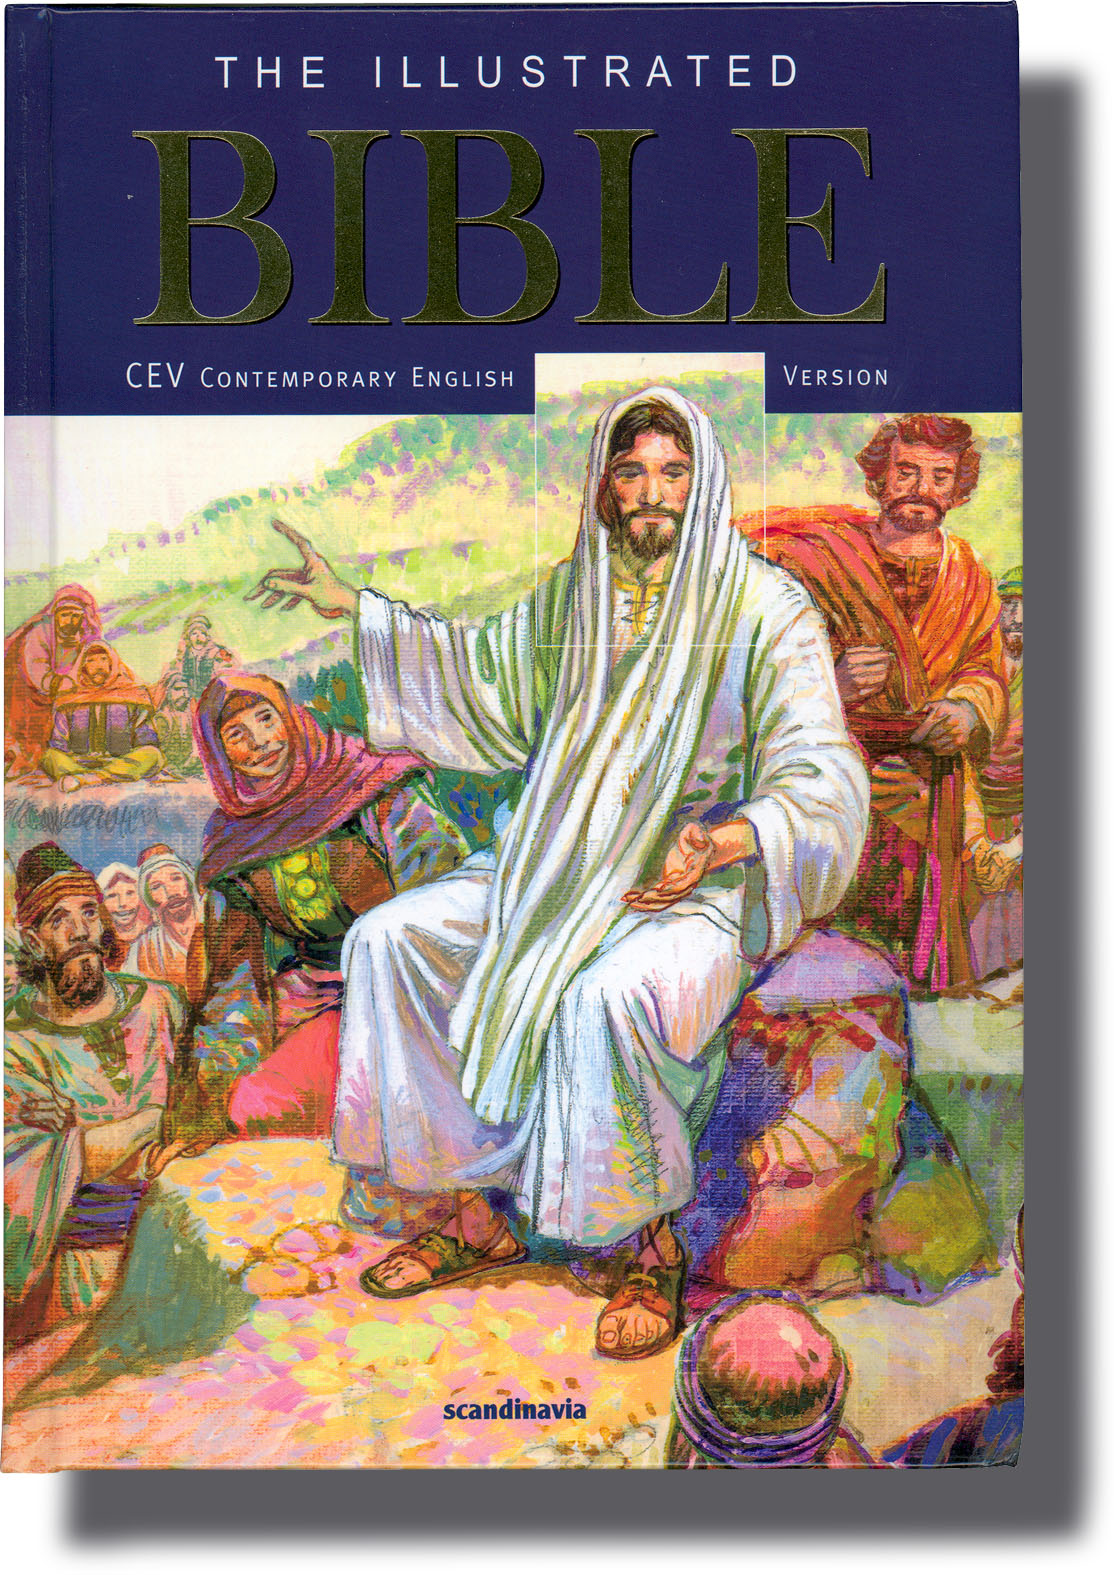 The Illustrated Bible - Sph.as